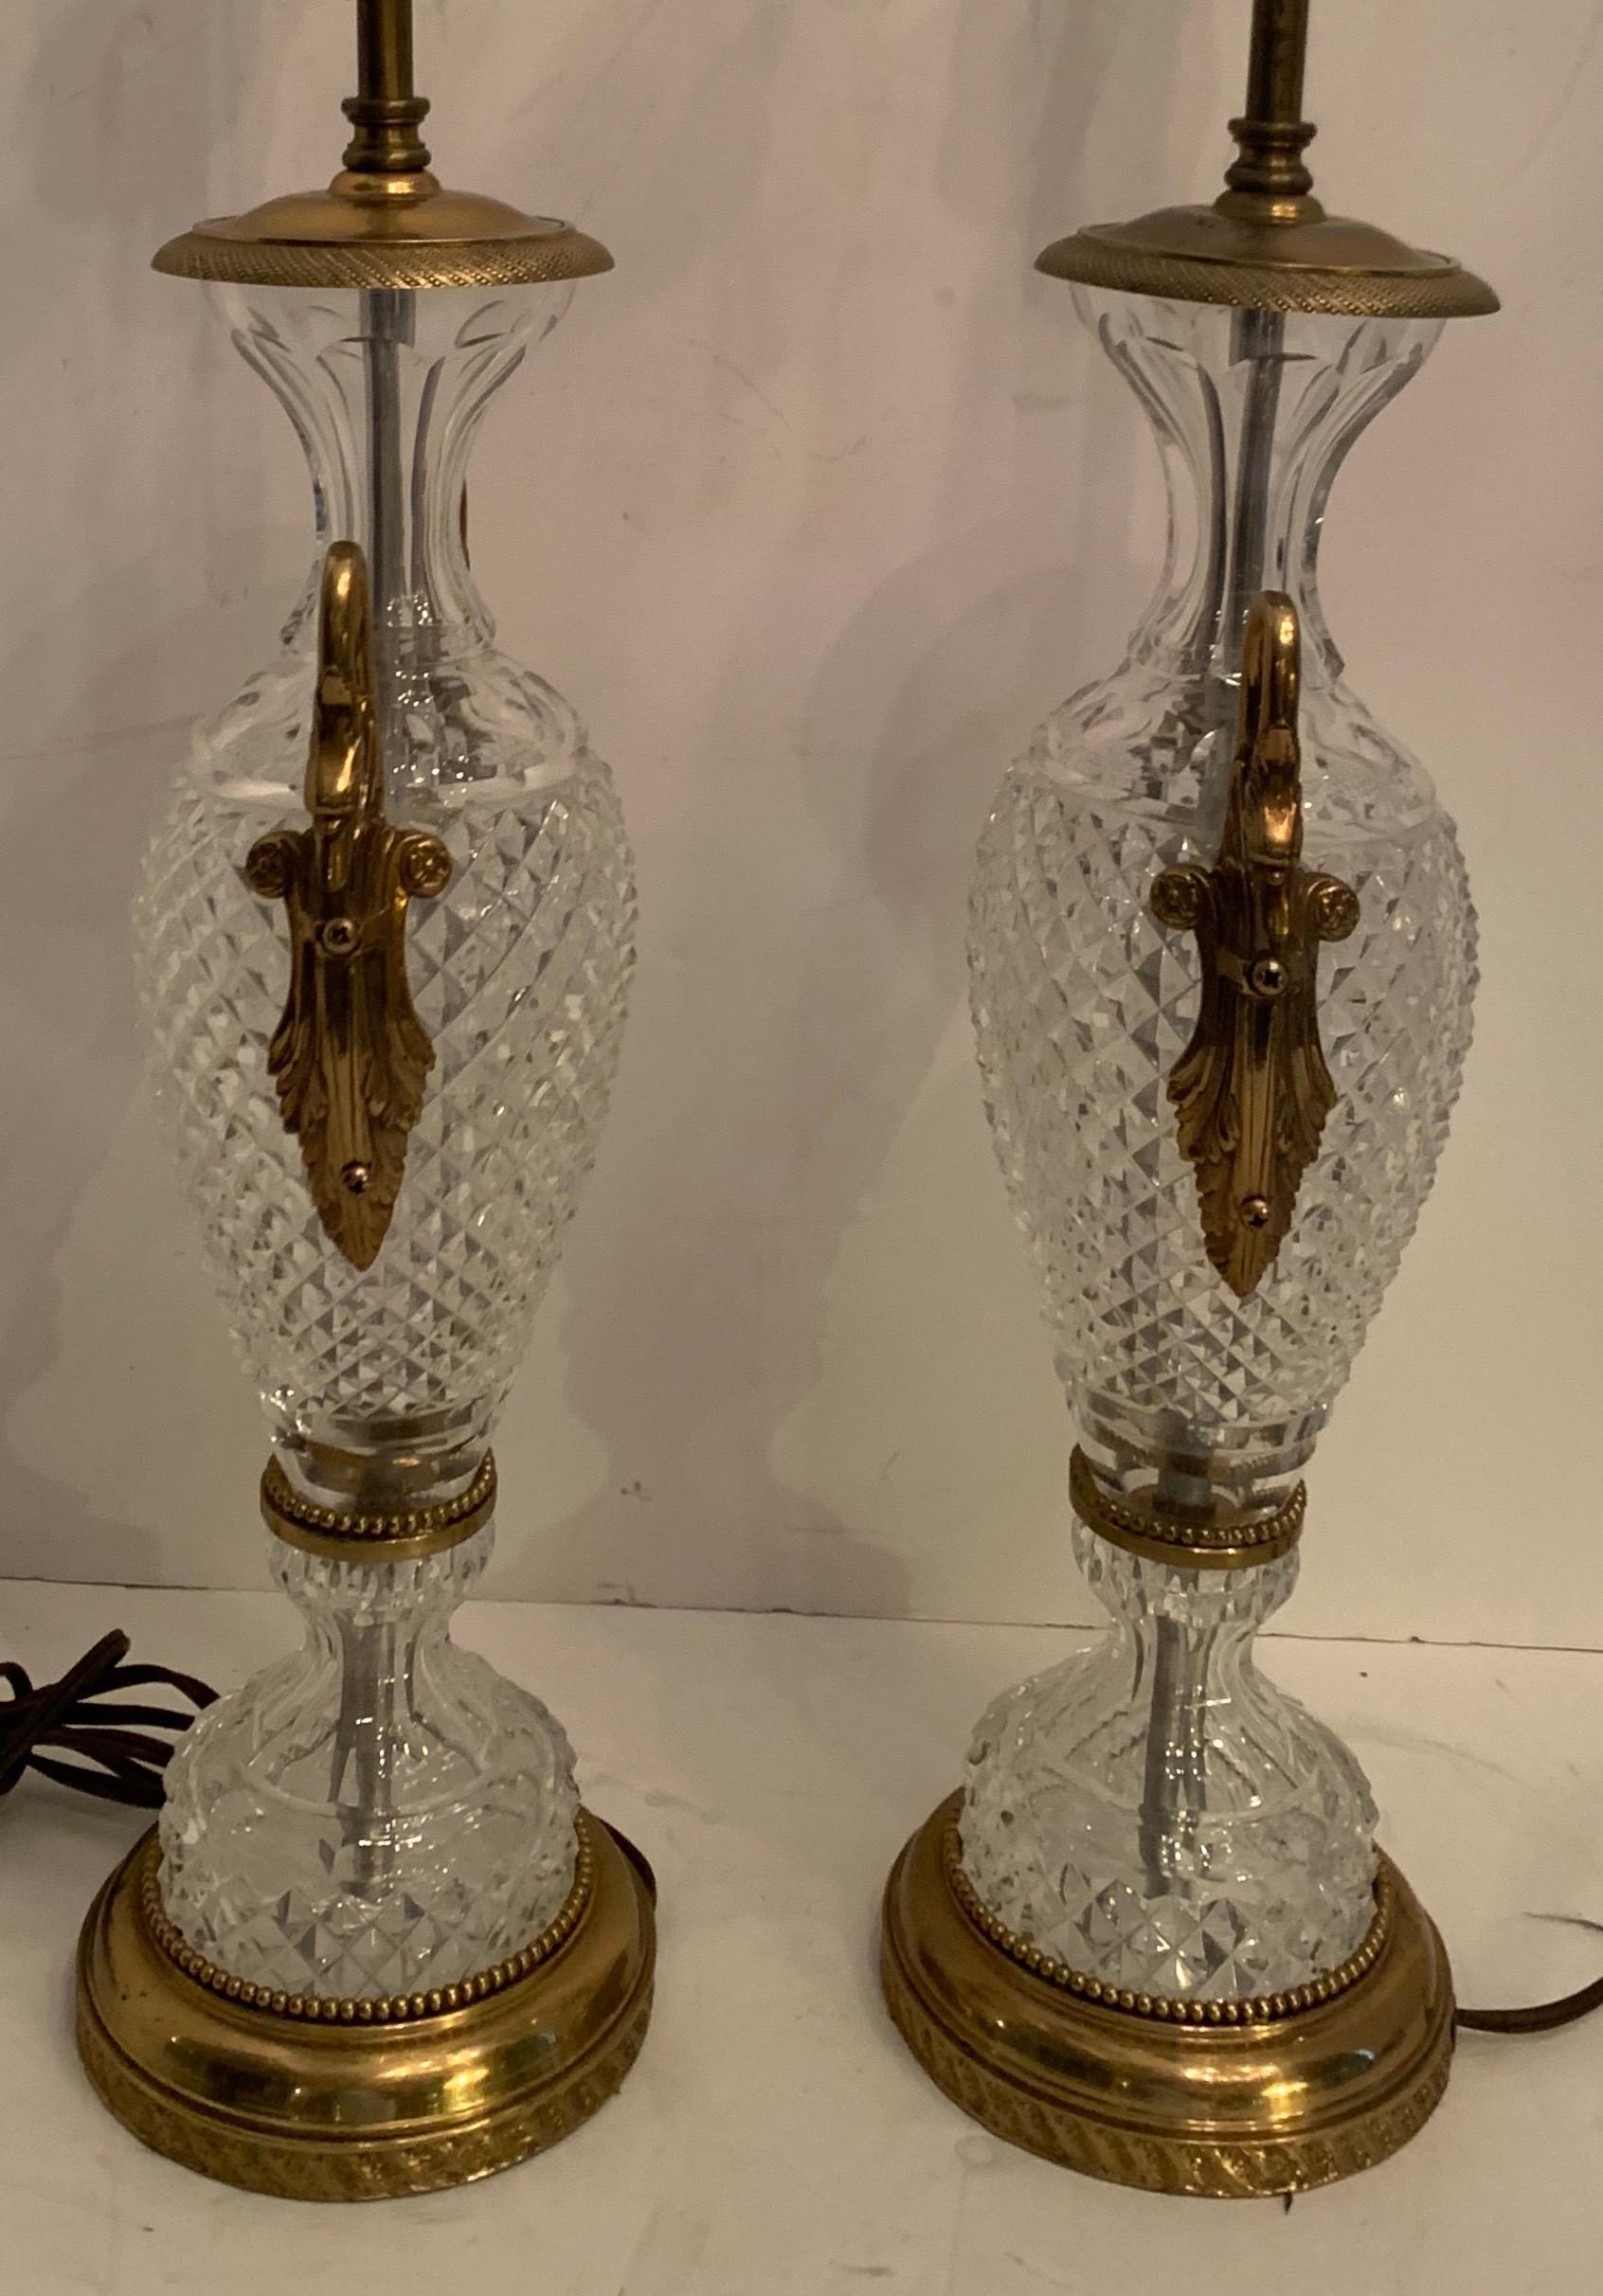 20th Century Wonderful French Neoclassical Swan Bronze Ormolu-Mounted Cut Crystal Lamps, Pair For Sale